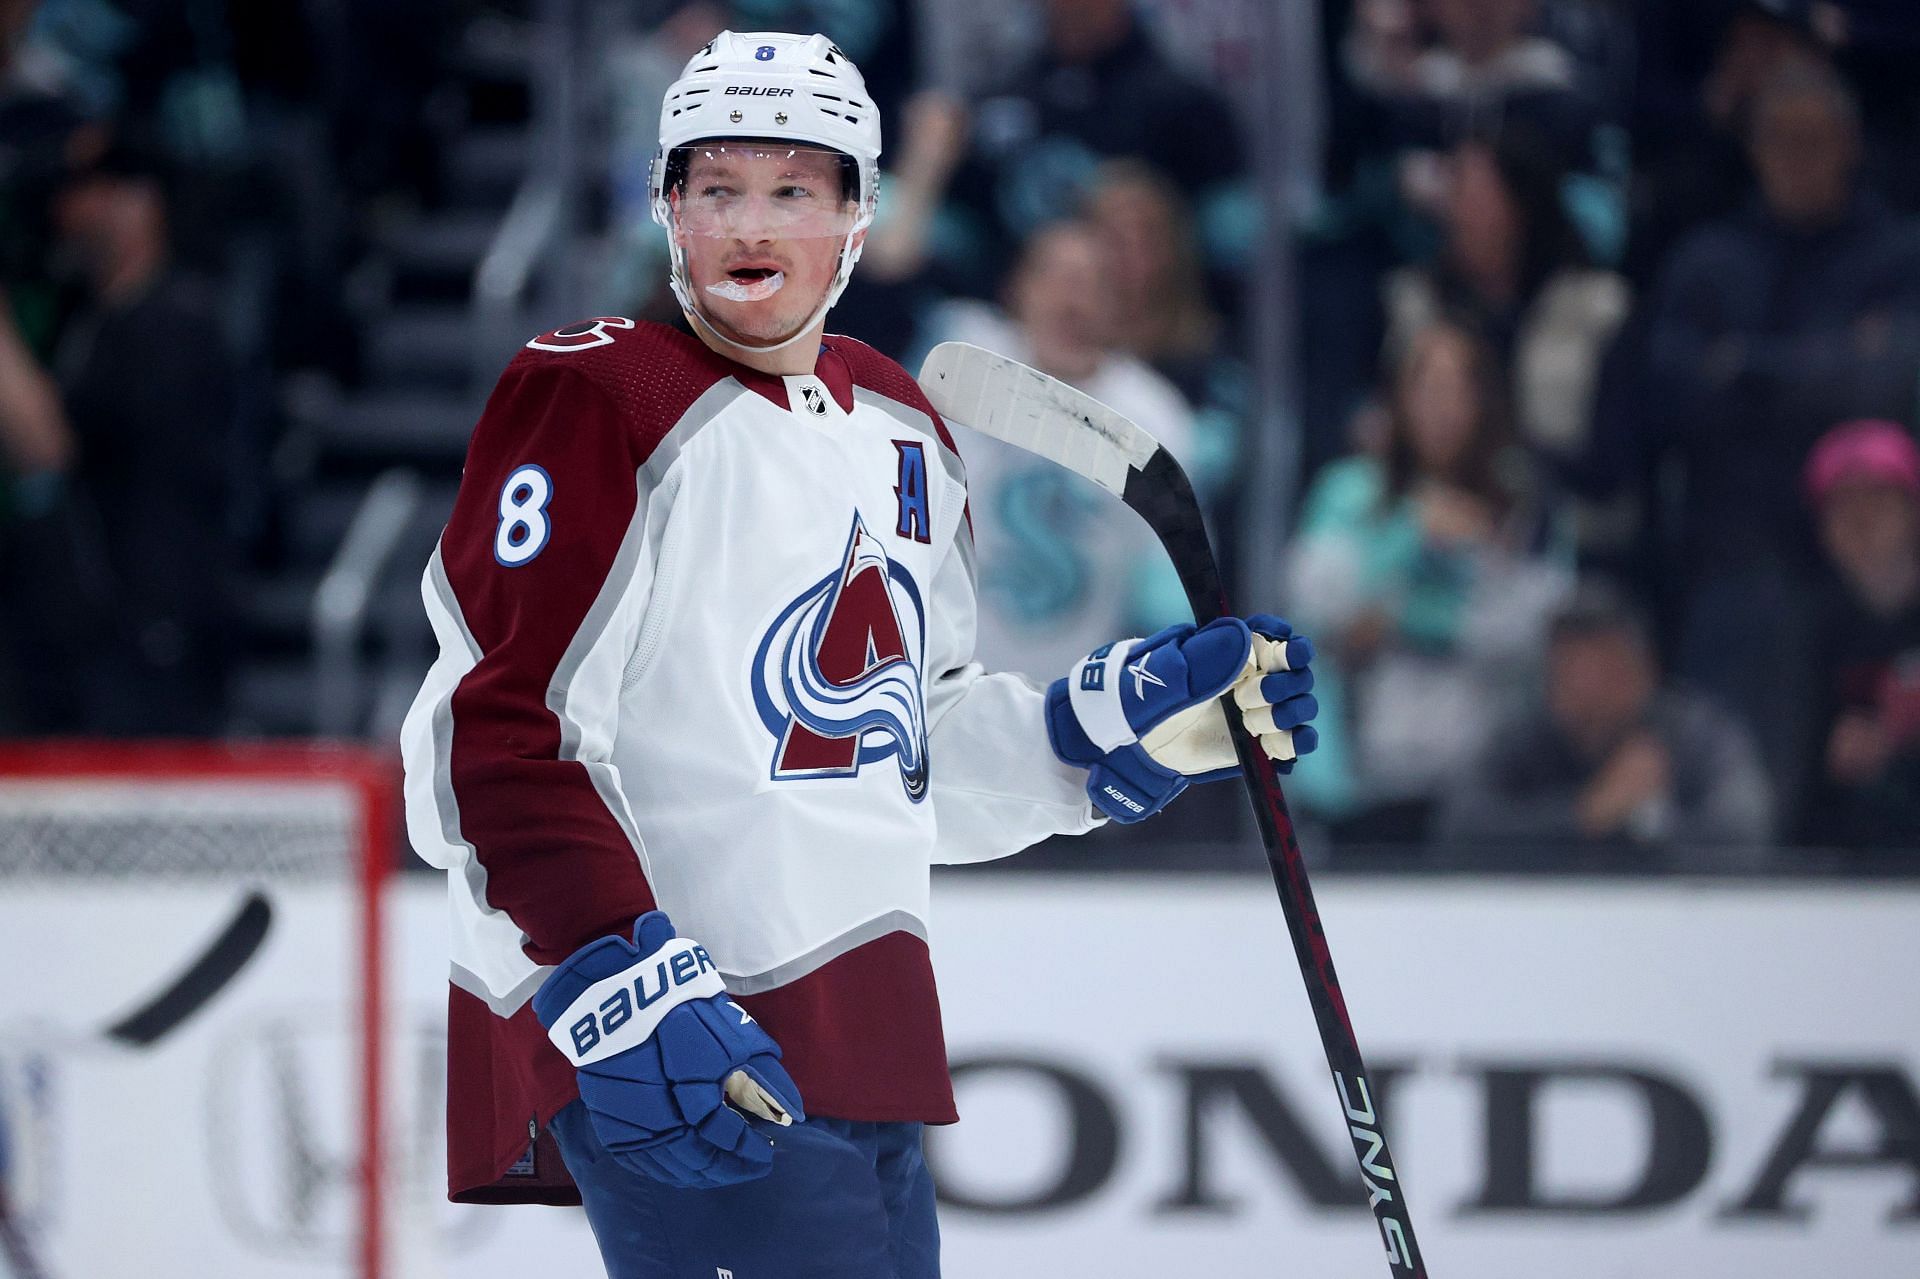 NHL fans want Cale Makar punished after hit on Jared McCann "How's he